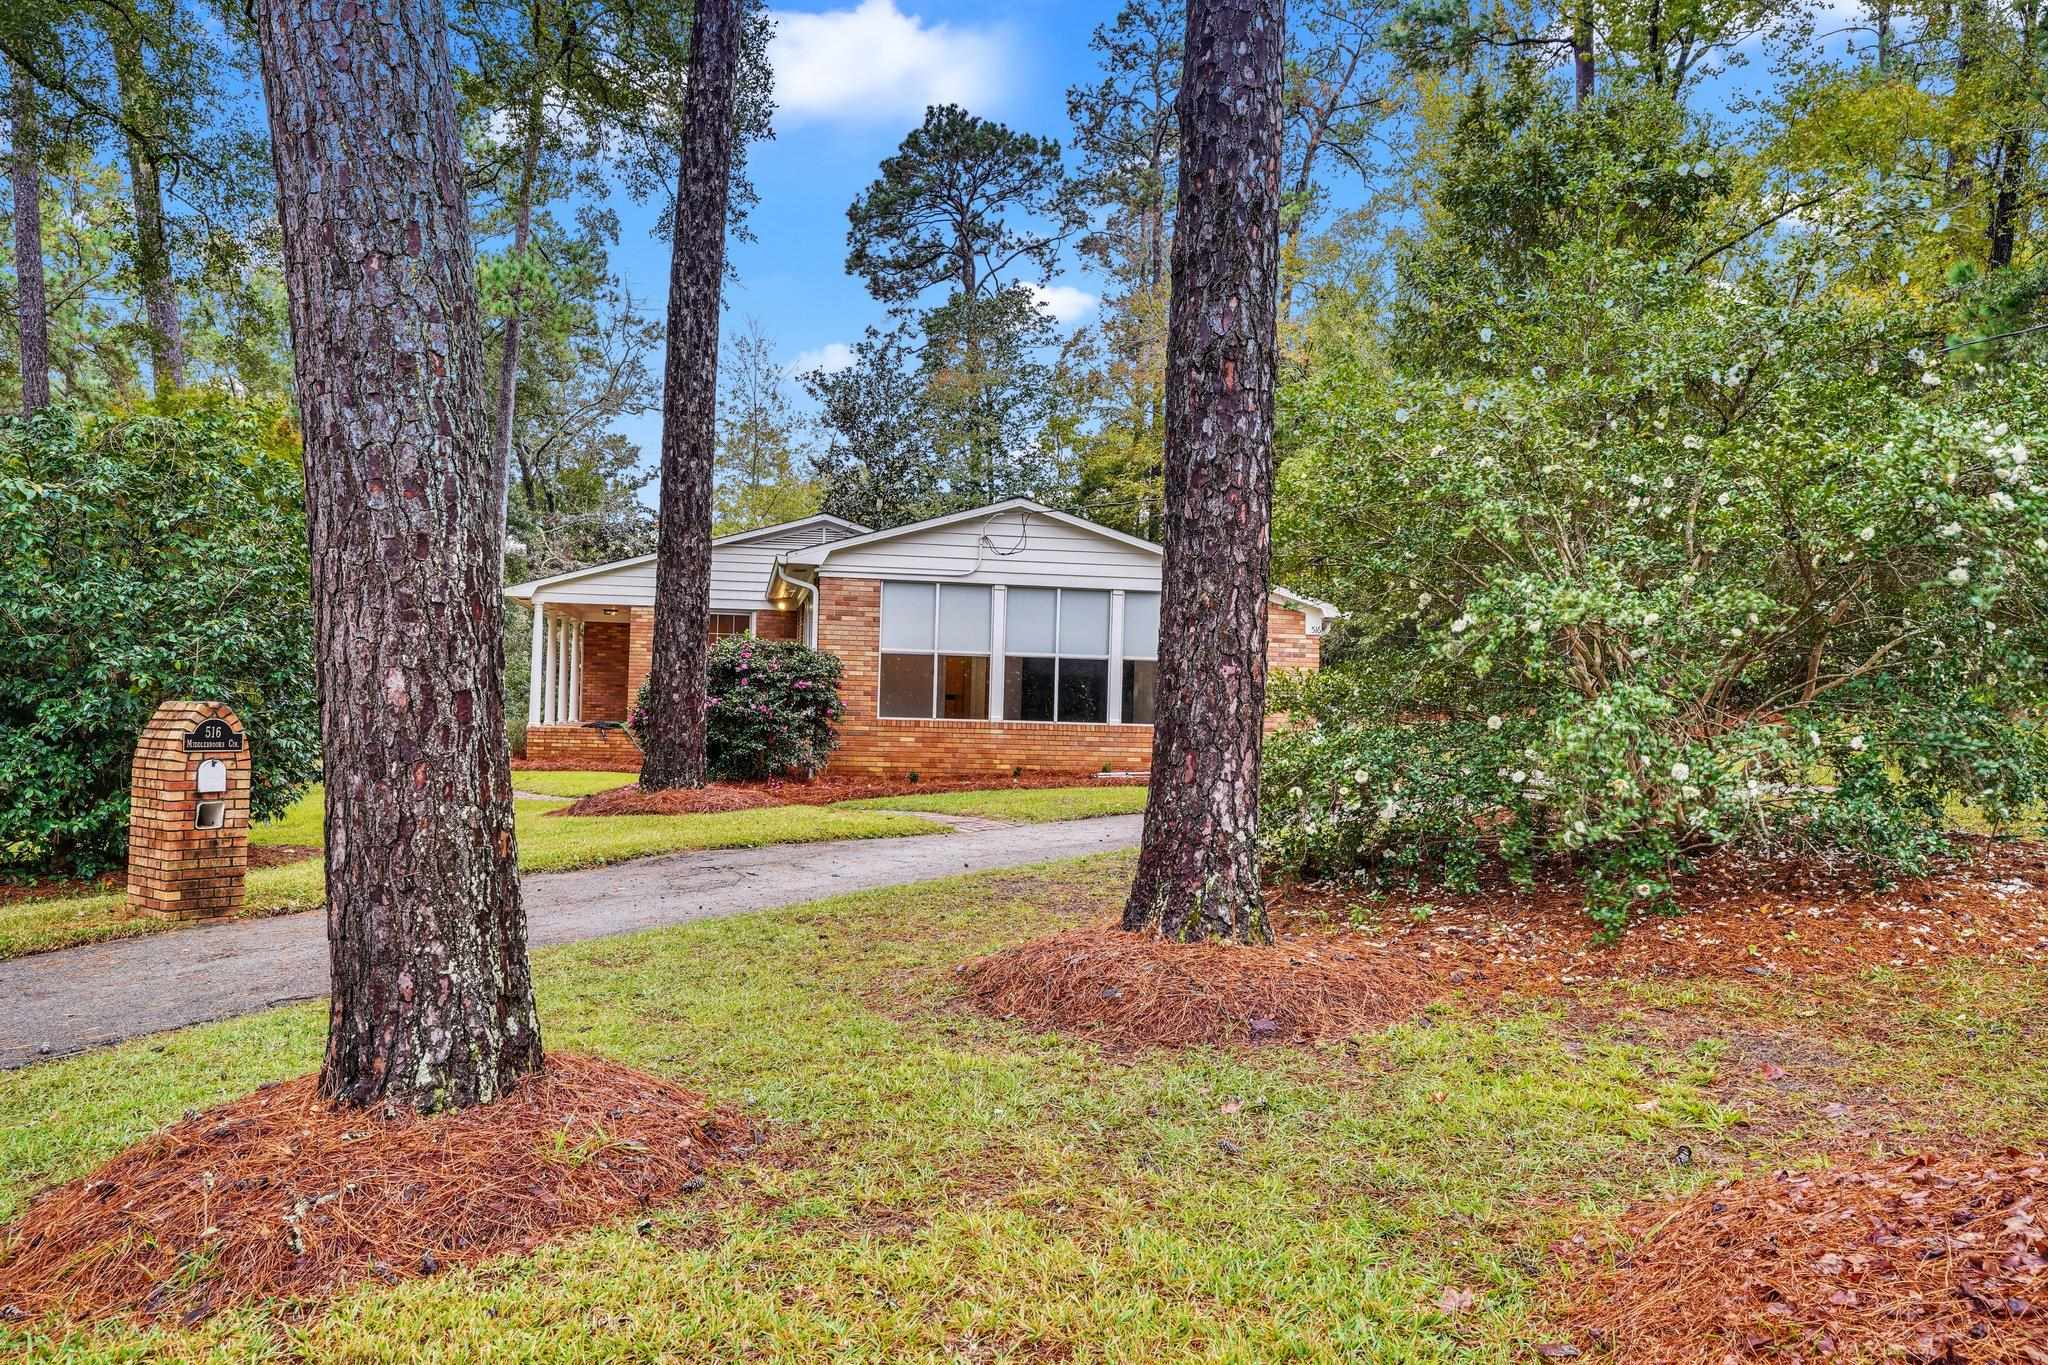 516 Middlebrooks Circle,TALLAHASSEE,Florida 32312,3 Bedrooms Bedrooms,2 BathroomsBathrooms,Detached single family,516 Middlebrooks Circle,369306